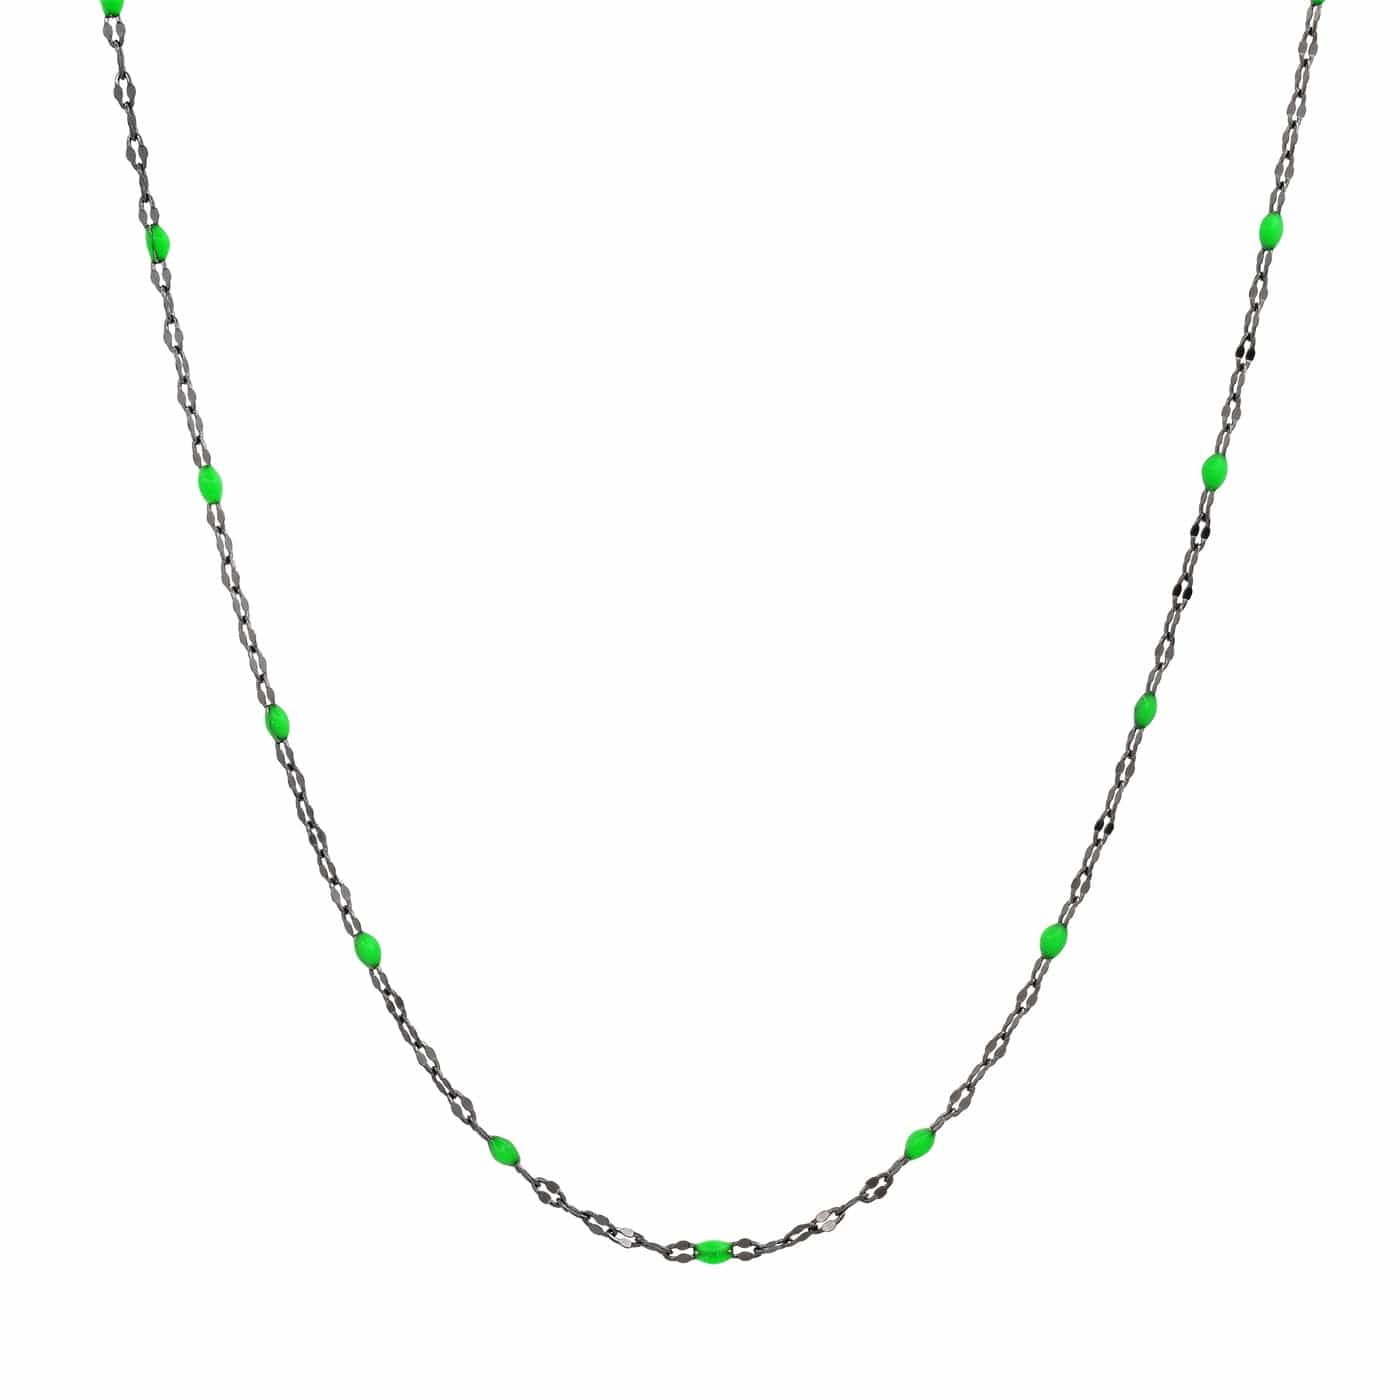 TAI JEWELRY Necklace Black/Neon Green Gold Vermeil Sparkle Chain with Enamel Stations